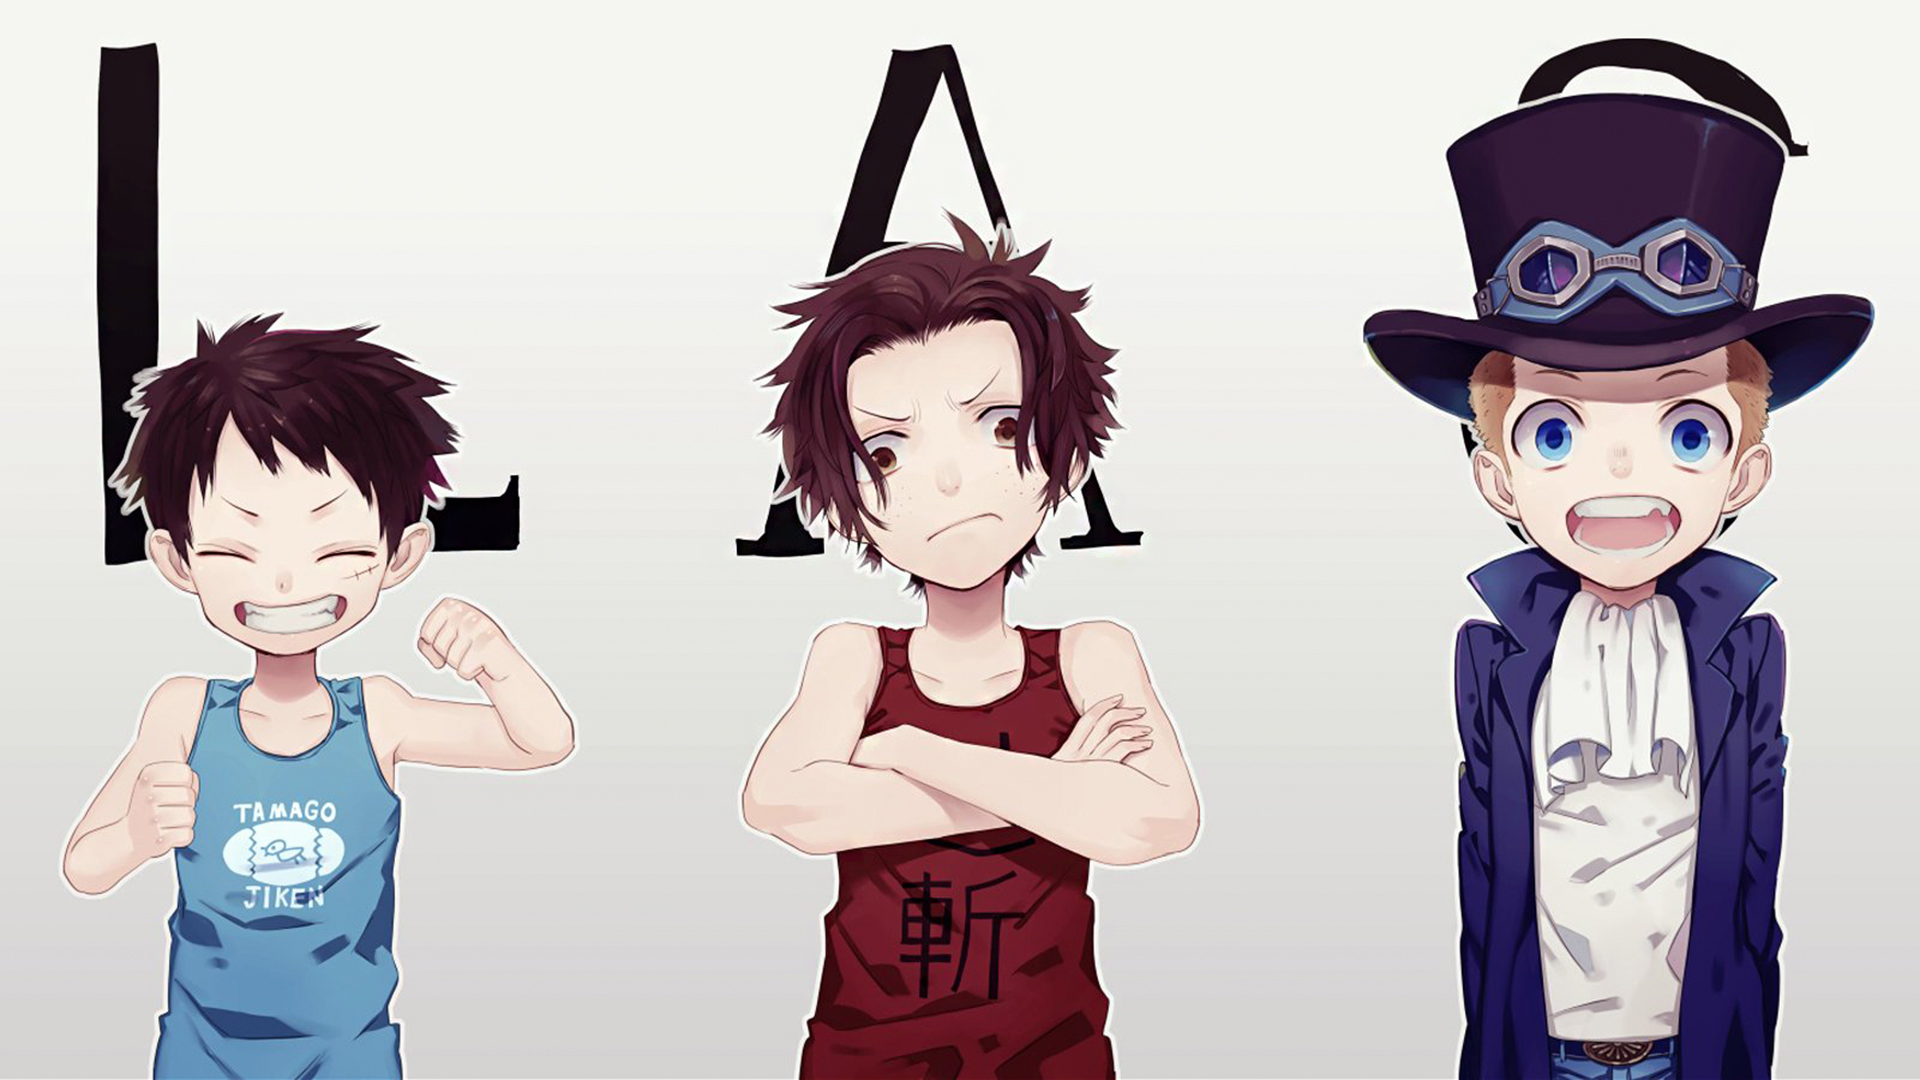 One Piece Ace And Luffy And Sabo